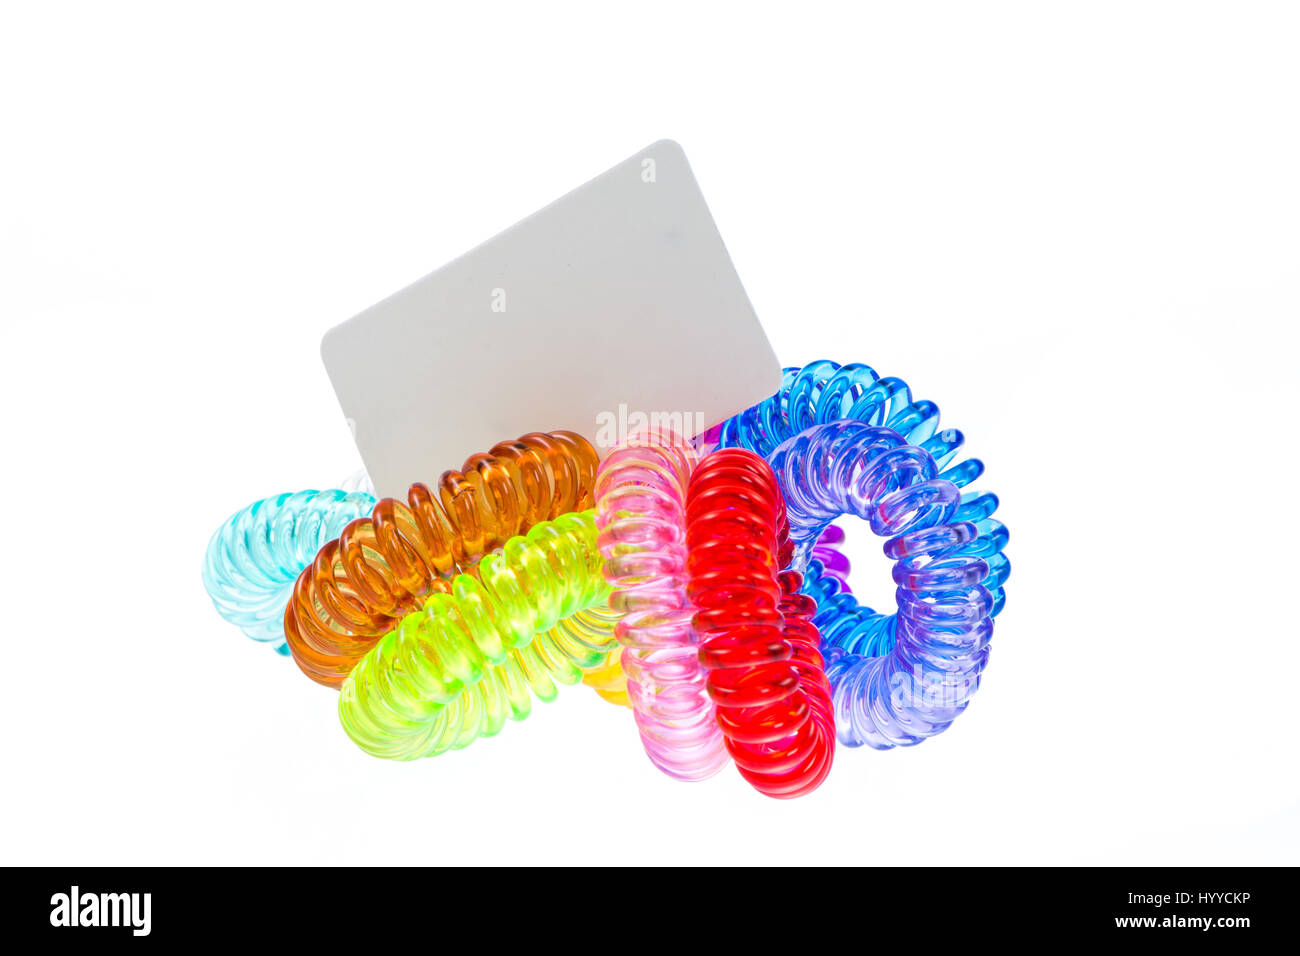 Isolated bunch of  various spiral hair ties with price tag Stock Photo